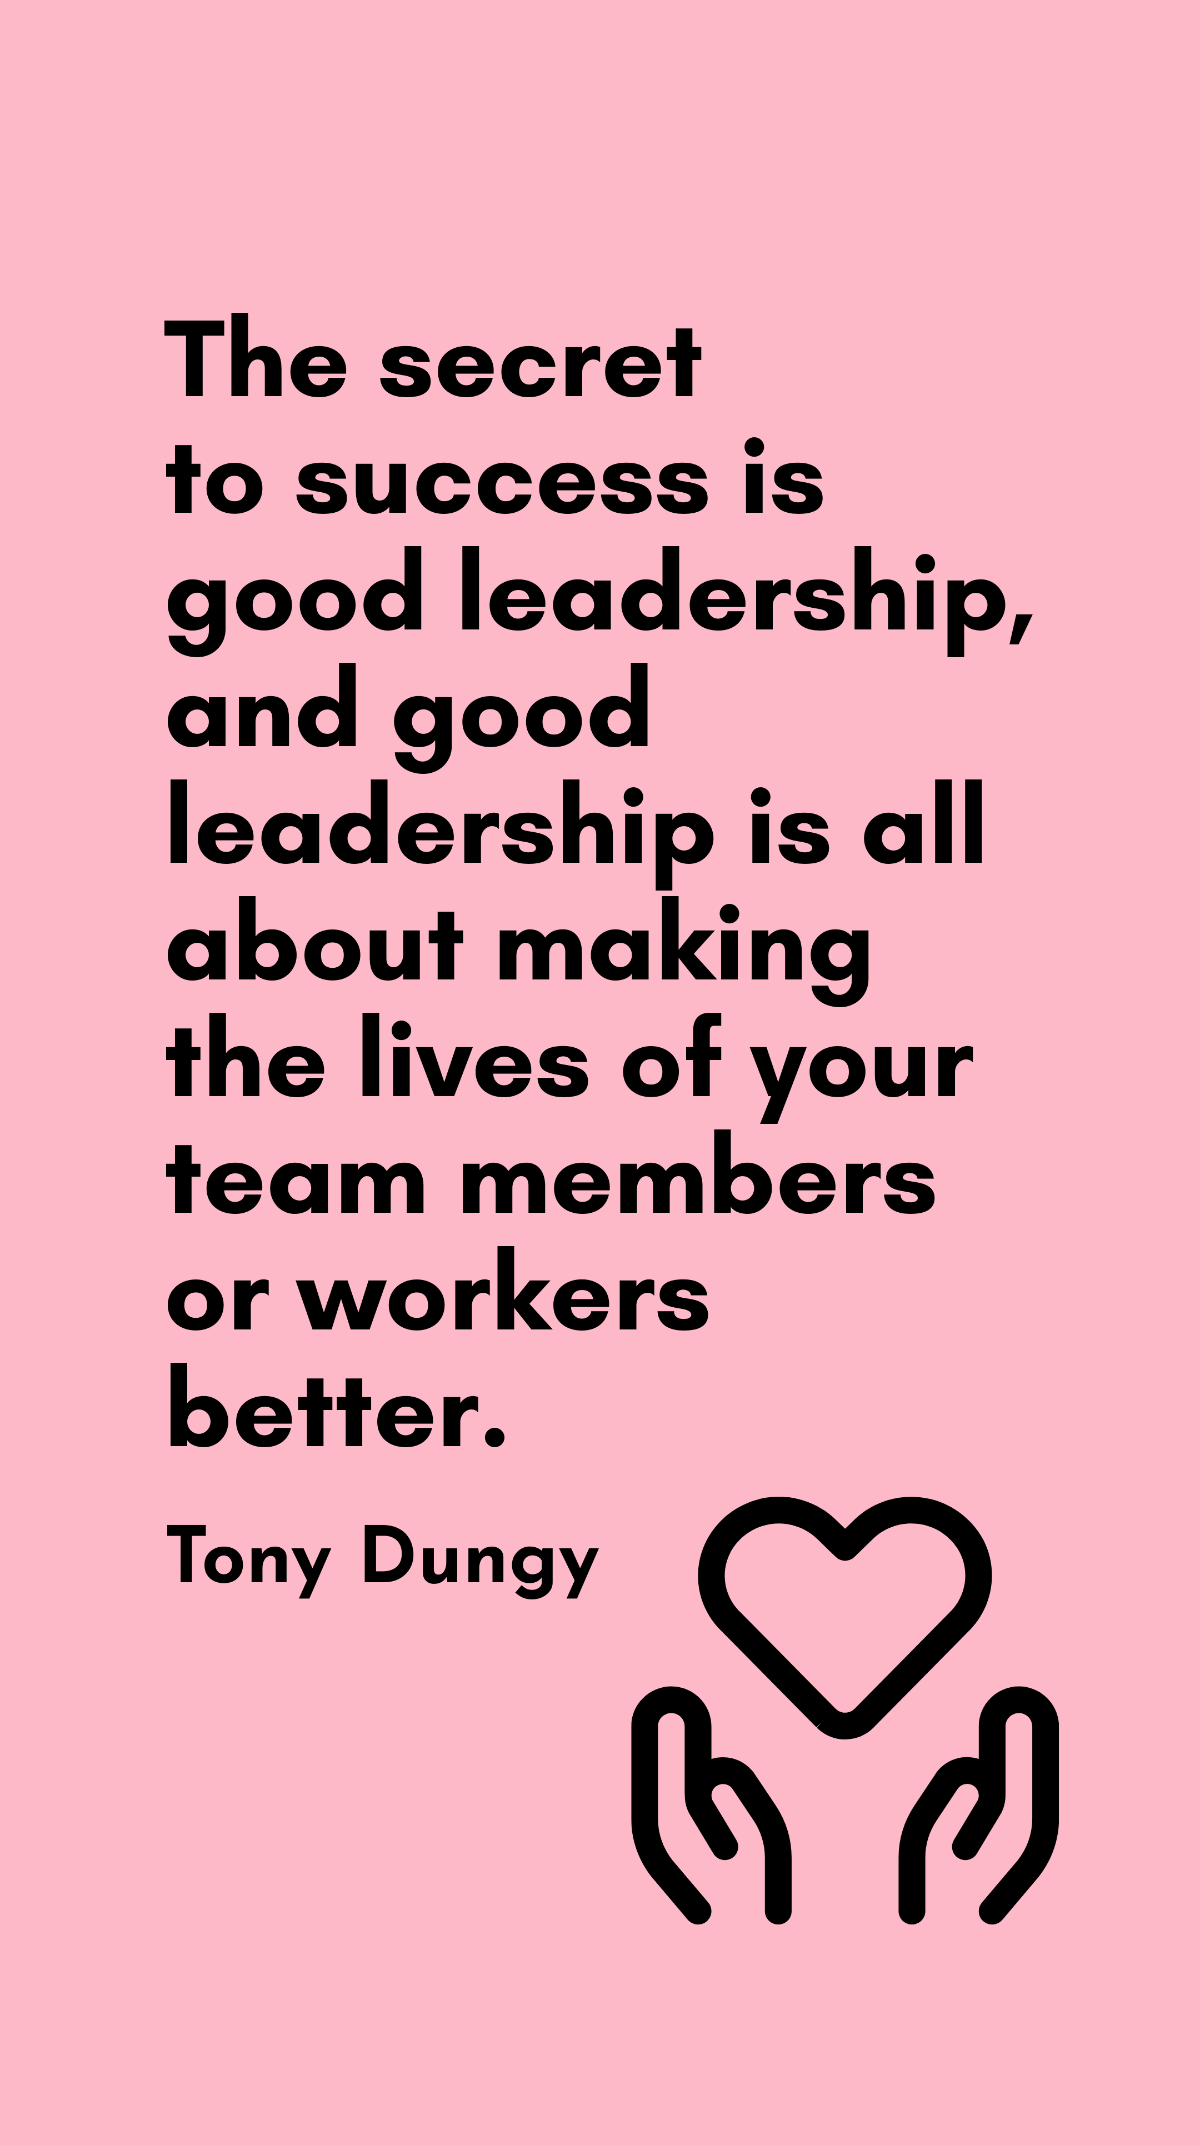 Tony Dungy - The secret to success is good leadership, and good leadership is all about making the lives of your team members or workers better. Template